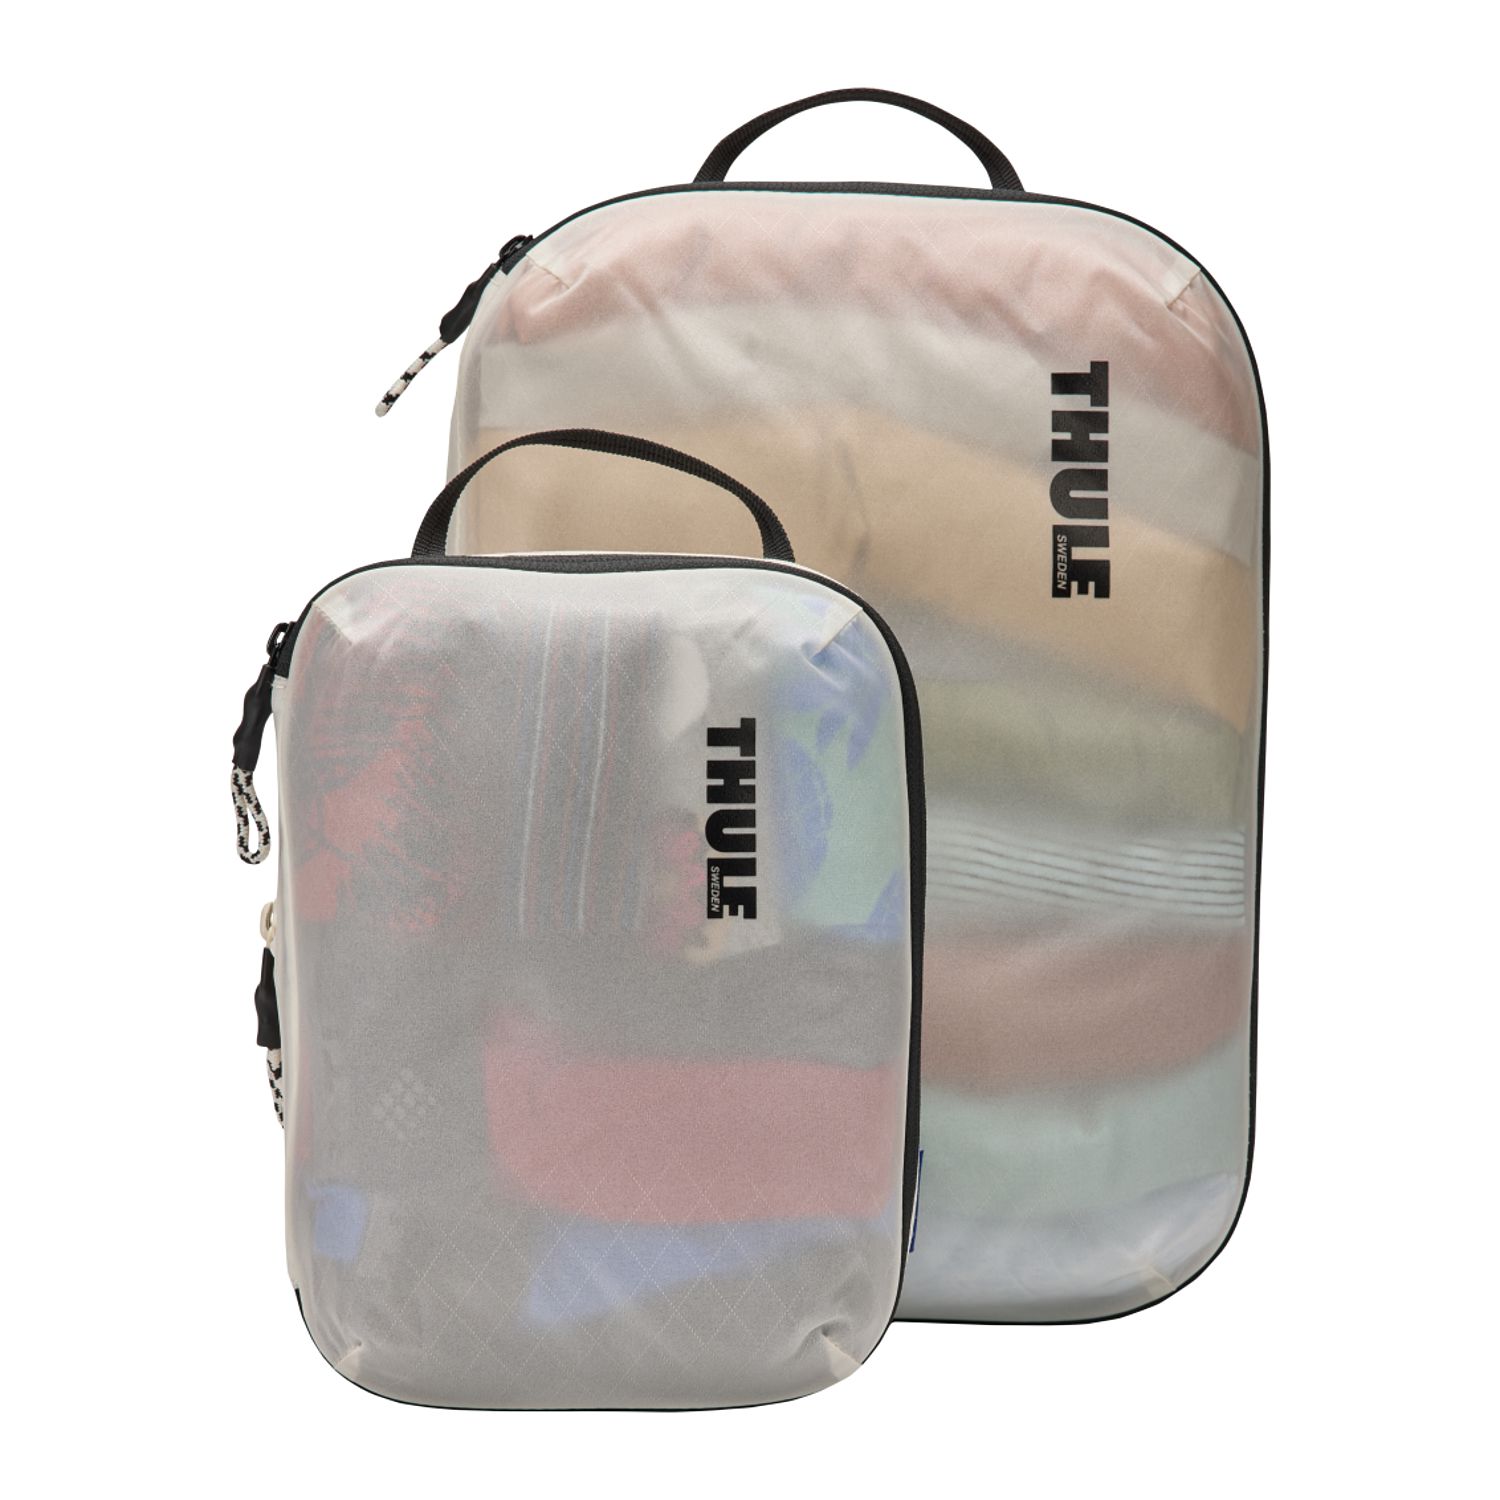 branded packing cubes